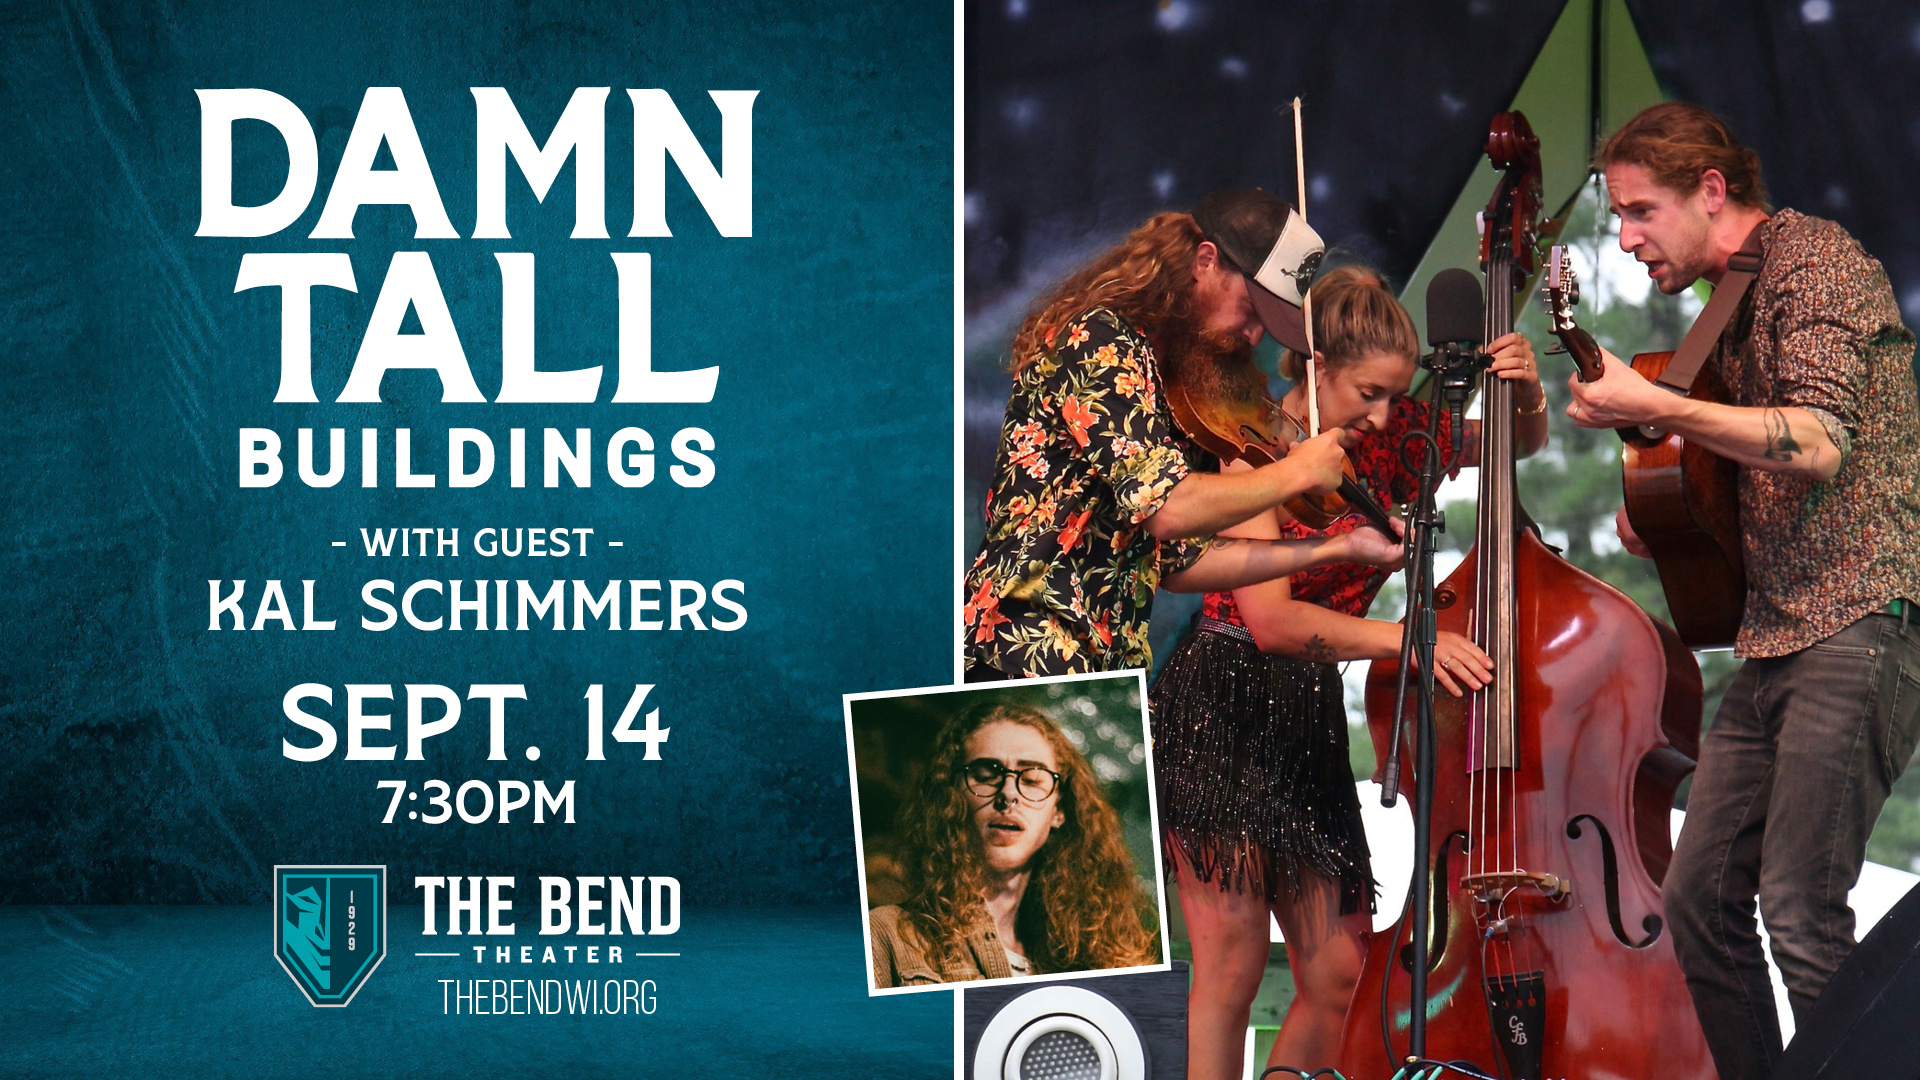 Damn Tall Buildings Live at The Bend Theater